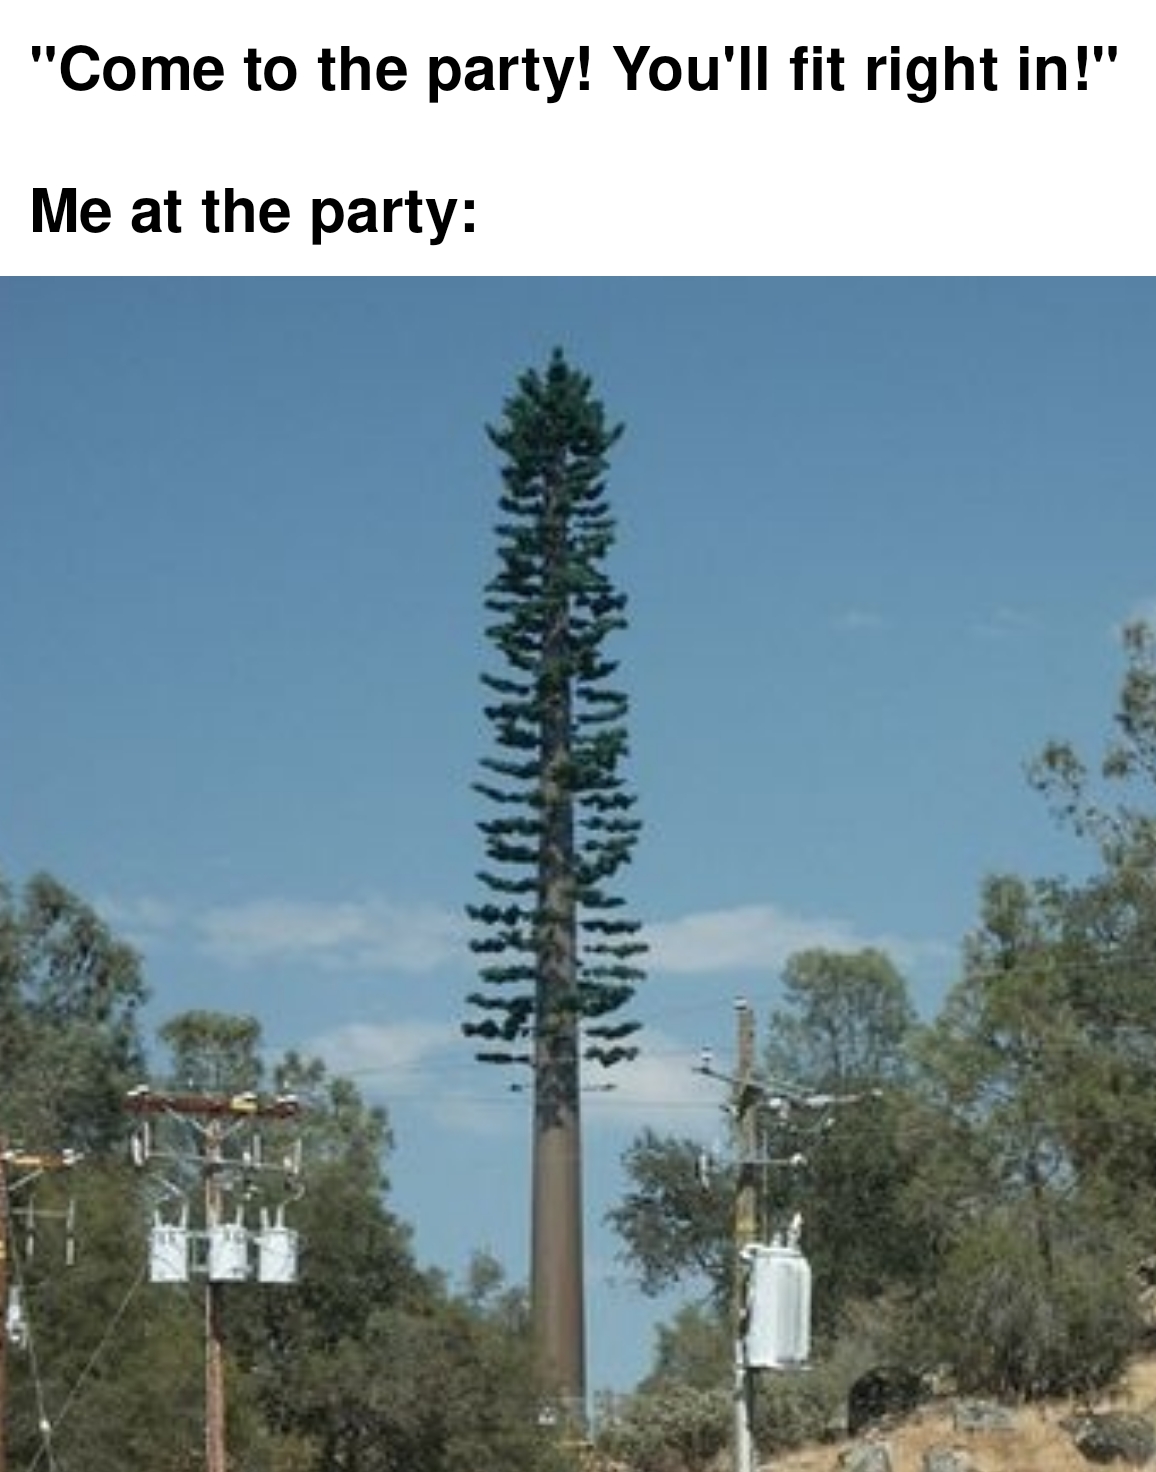 37 funny memes and pics -  cell phone towers - "Come to the party! You'll fit right in!" Me at the party